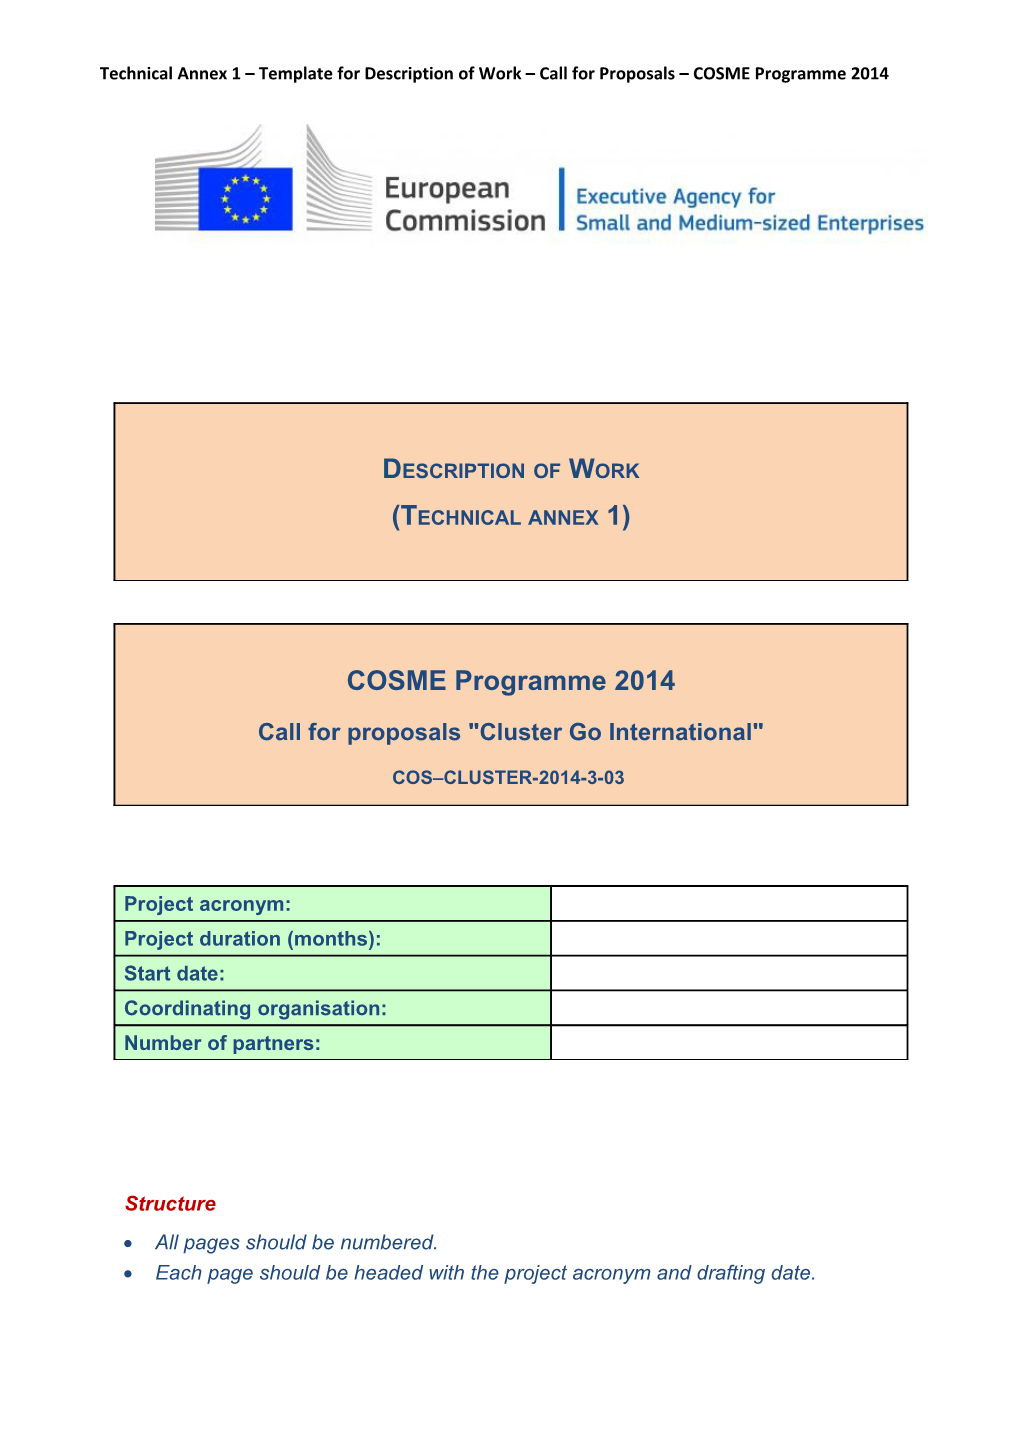 Technical Annex 1 Template for Description of Work Call for Proposals COSME Programme 2014